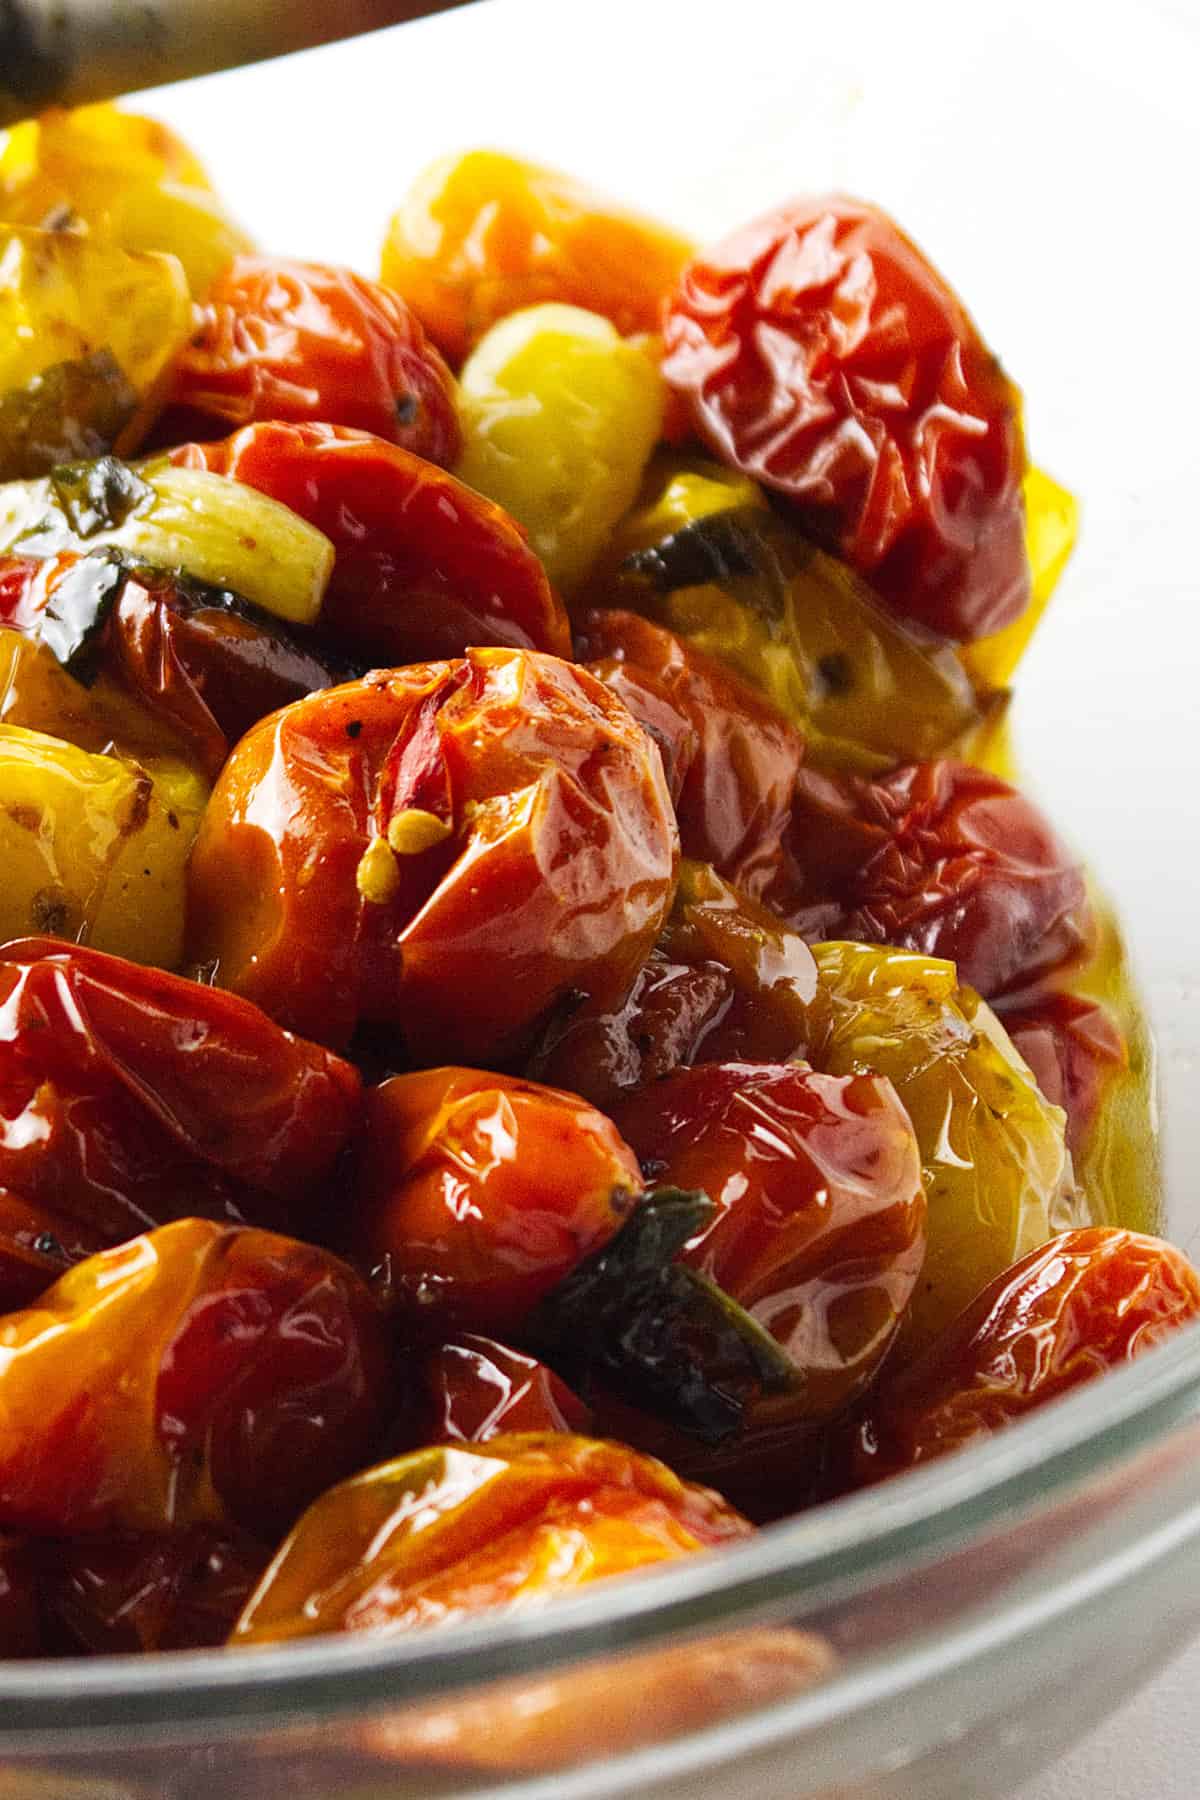 clear glass bowl of roasted heirloom cherry tomatoes.